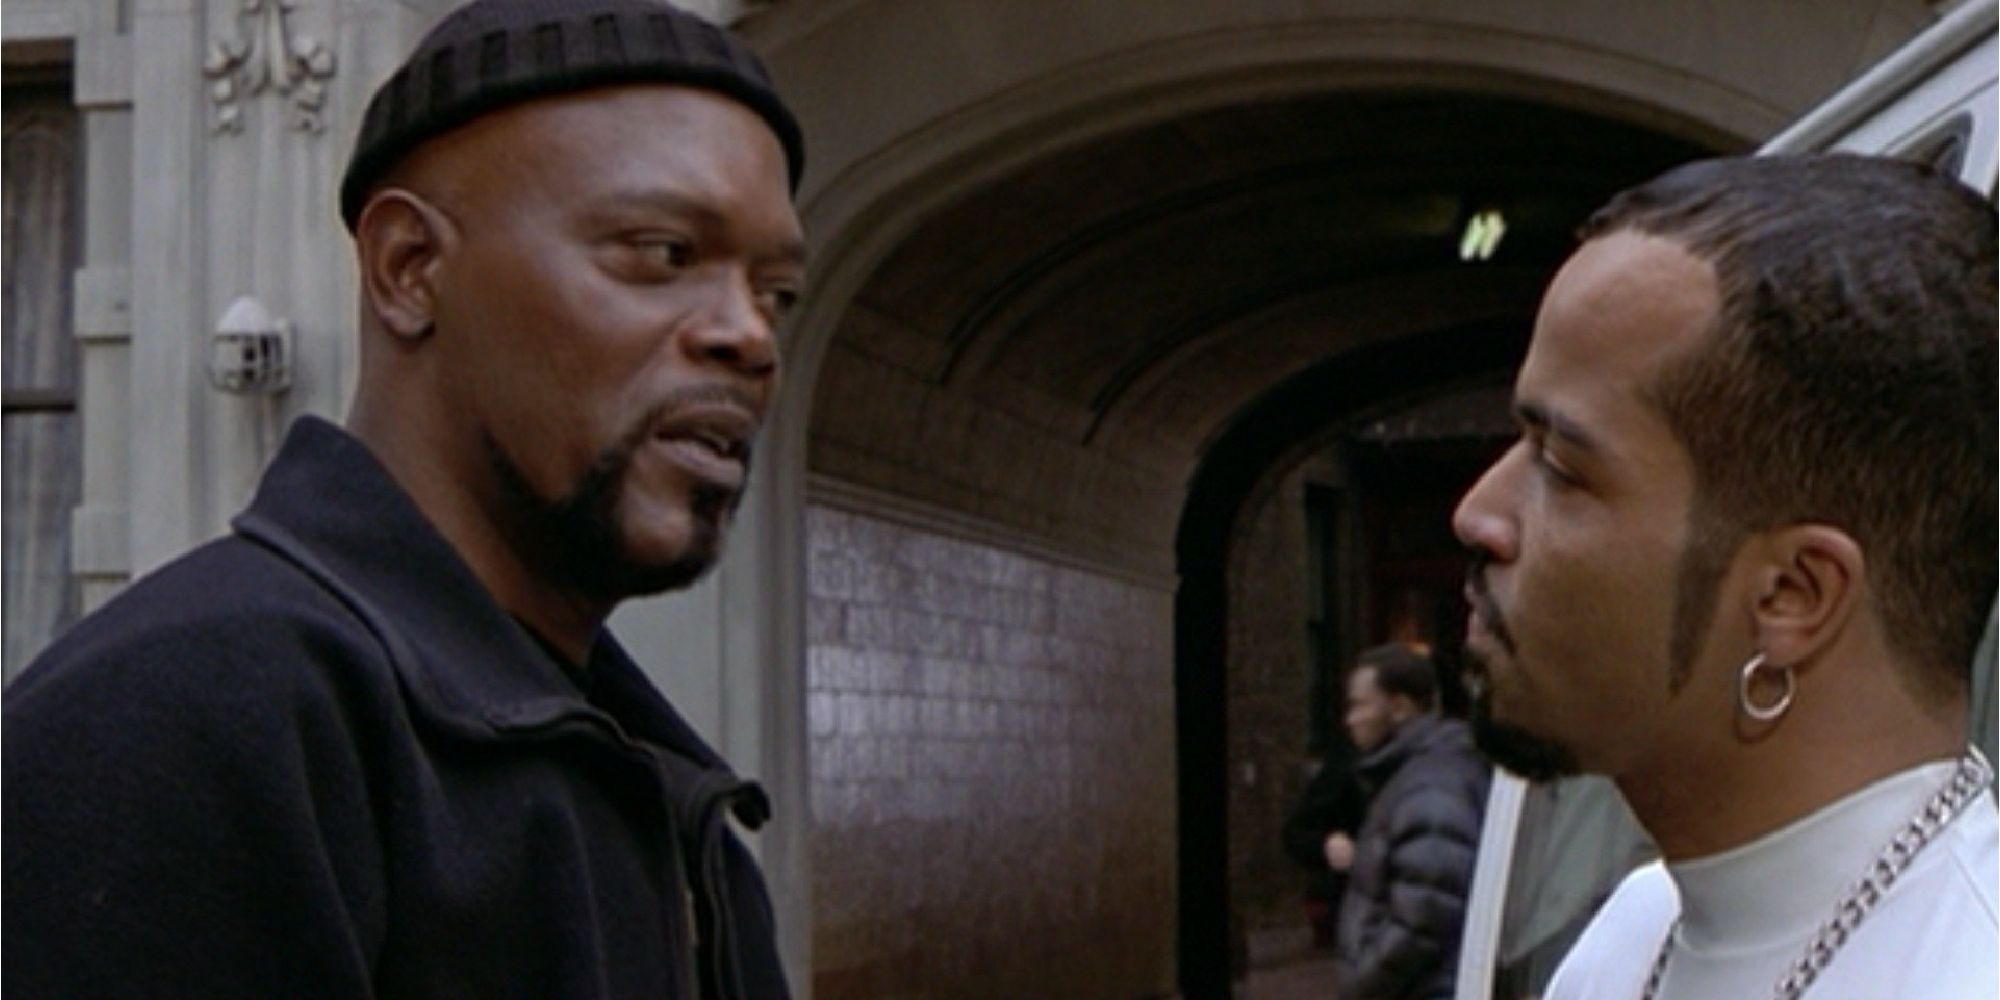 Samuel L. Jackson as Shaft and Jeffrey Wright as Peoples in Shaft (2000)